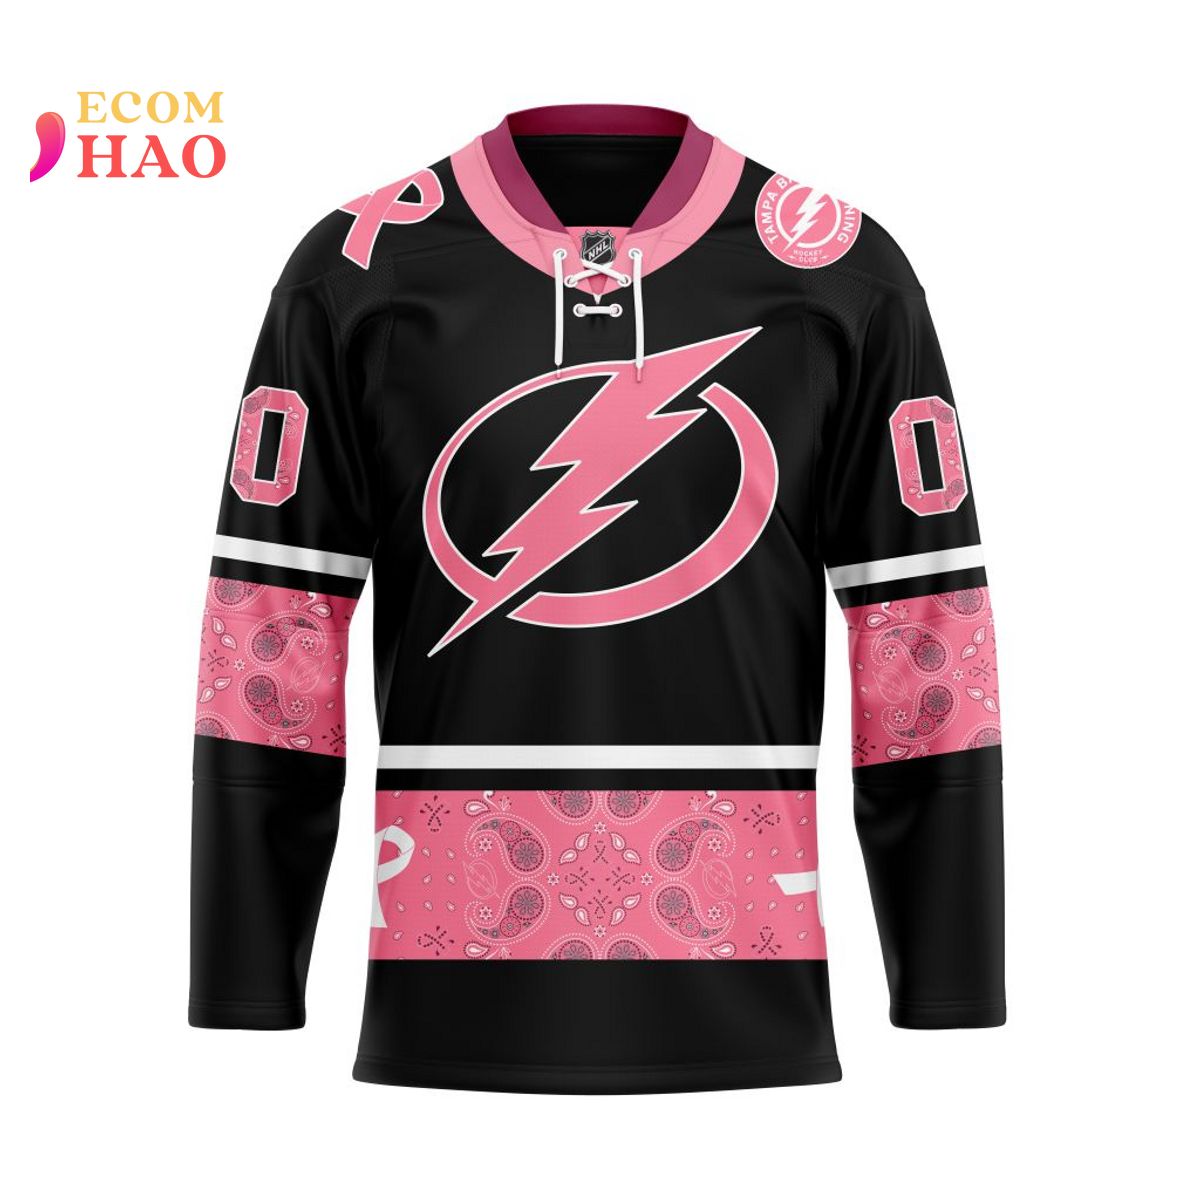 NHL Tampa Bay Lightning Specialized Design In Classic Style With Paisley!  IN OCTOBER WE WEAR PINK BREAST CANCER 3D Hockey Jersey - Ecomhao Store